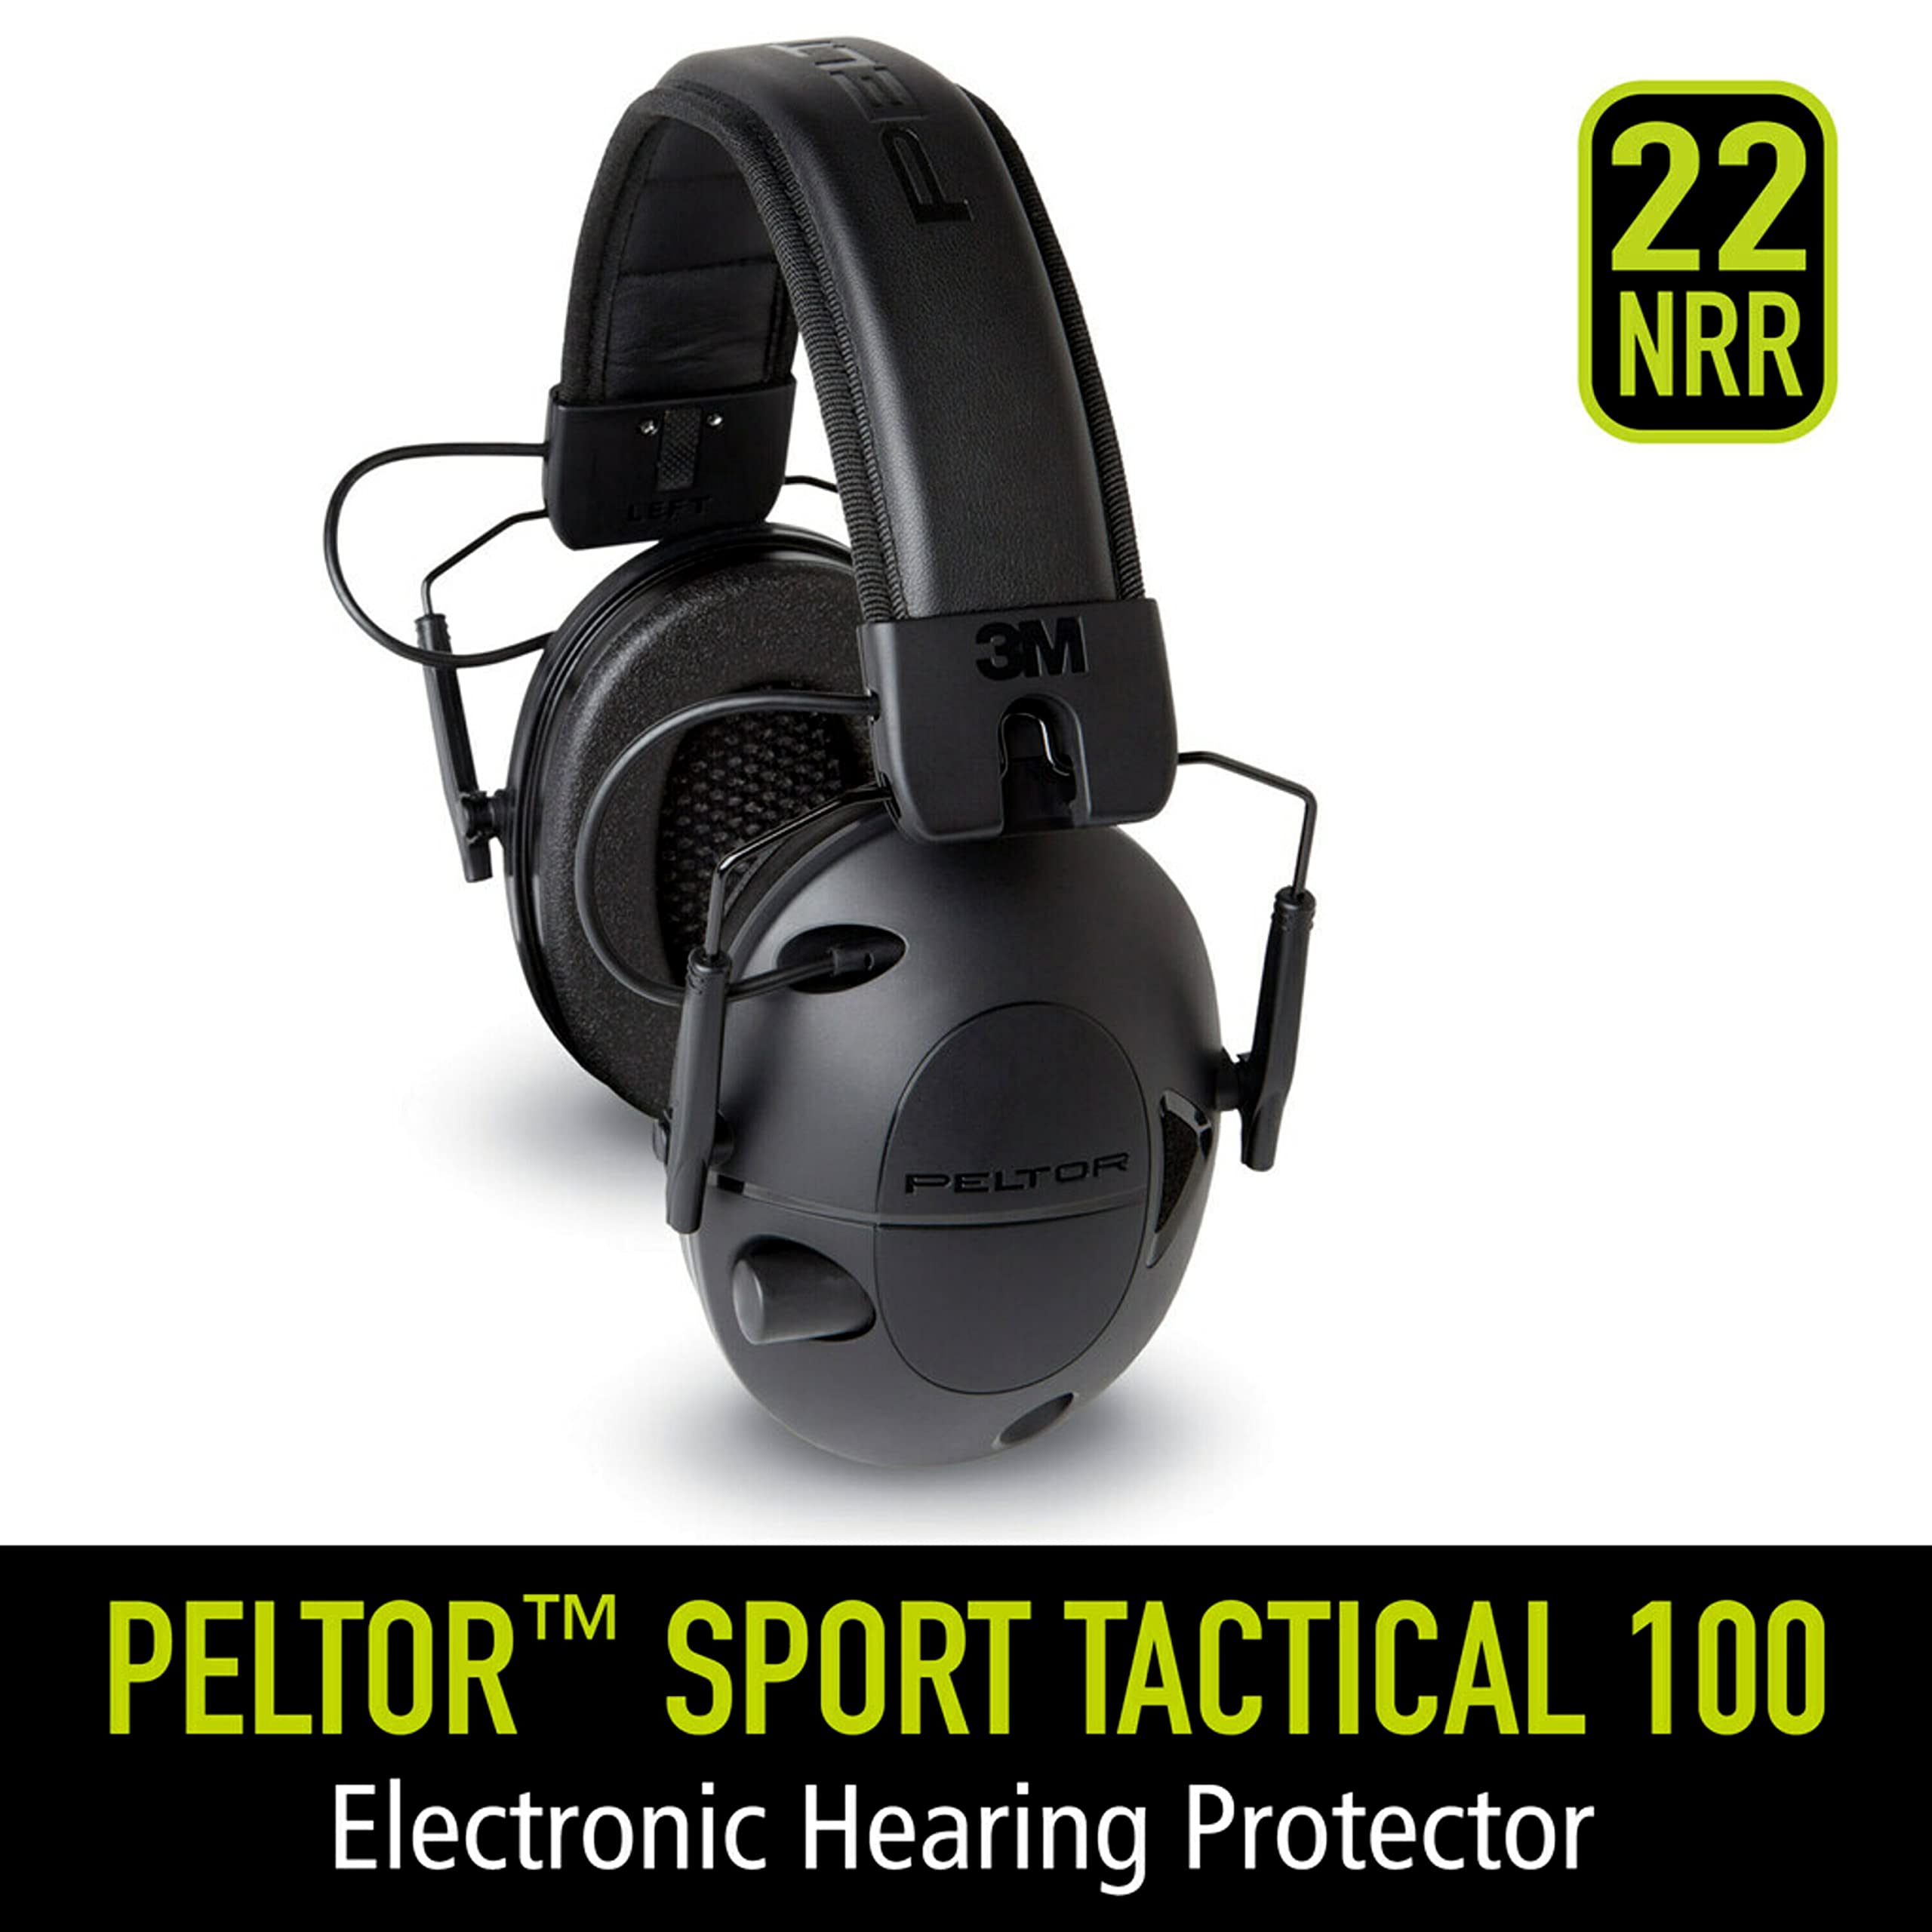 Peltor Sport Tactical 100 Electronic Hearing Protector, Ear Protection, NRR 22 dB, Ideal for the Range, Shooting and Hunting, TAC100-OTH